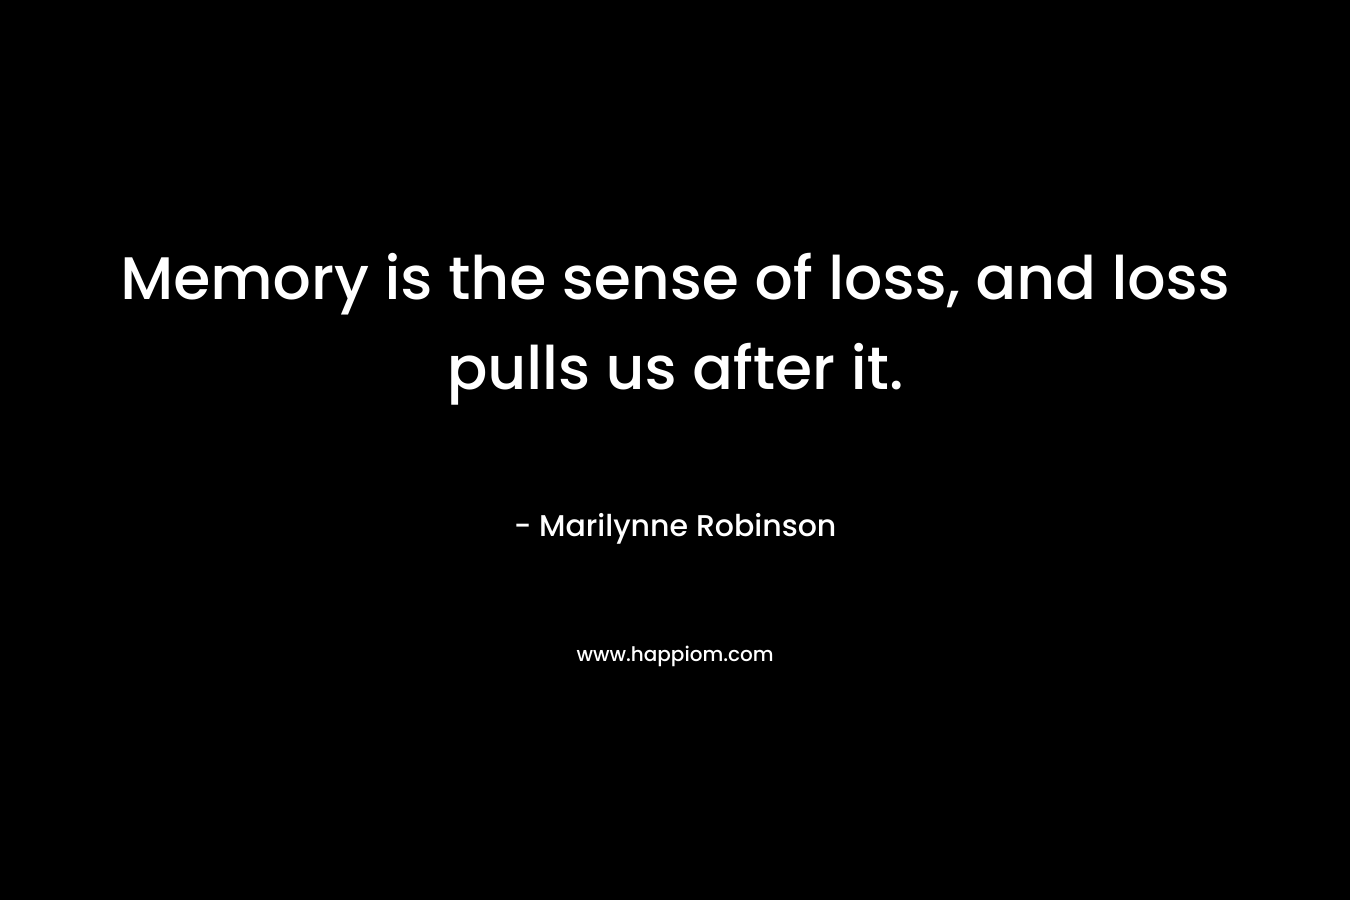 Memory is the sense of loss, and loss pulls us after it. – Marilynne Robinson